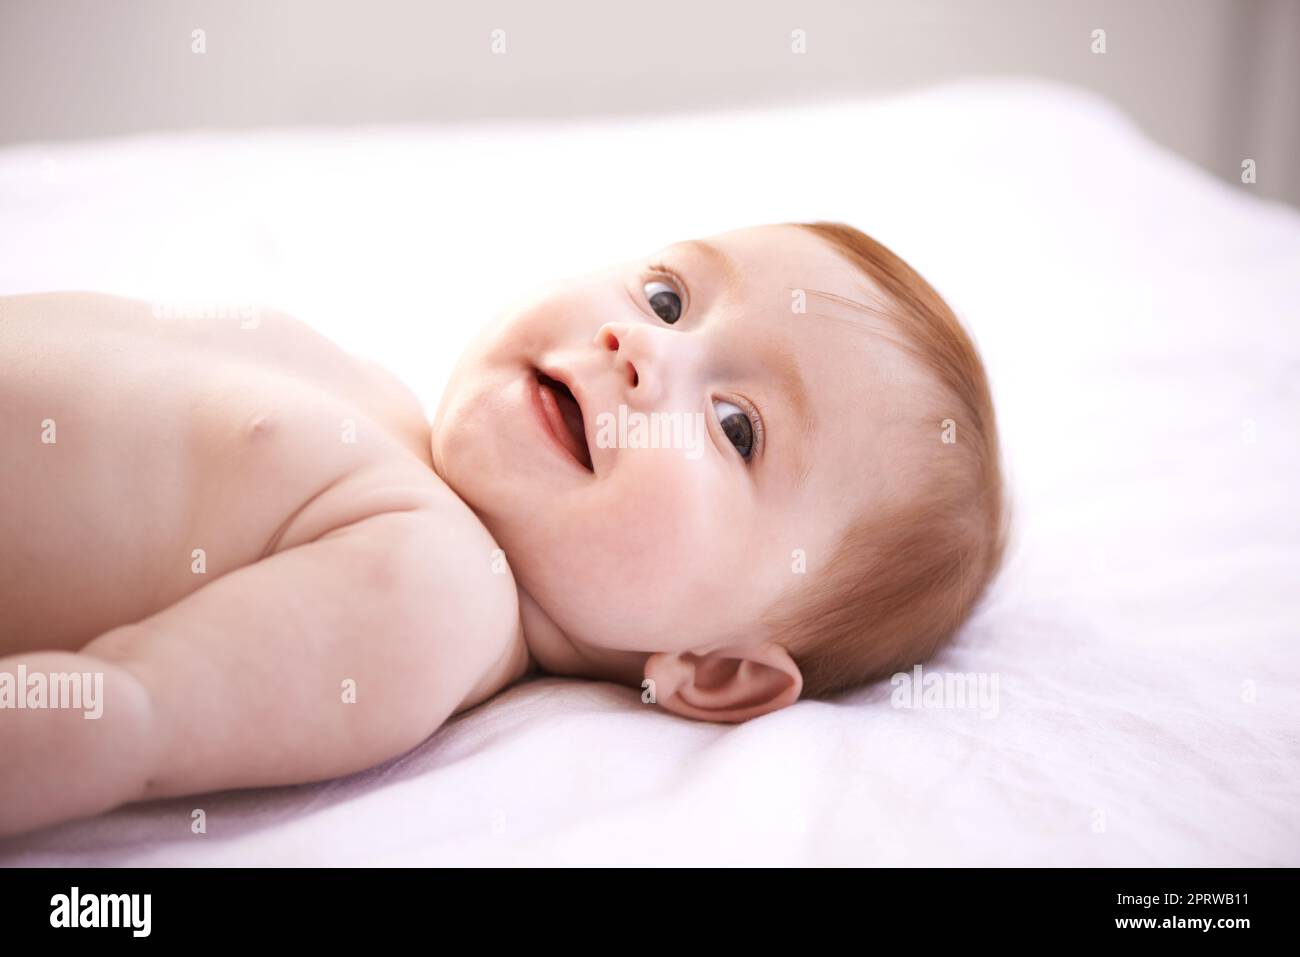 Joy and innocence. an adorable baby girl with red hair. Stock Photo